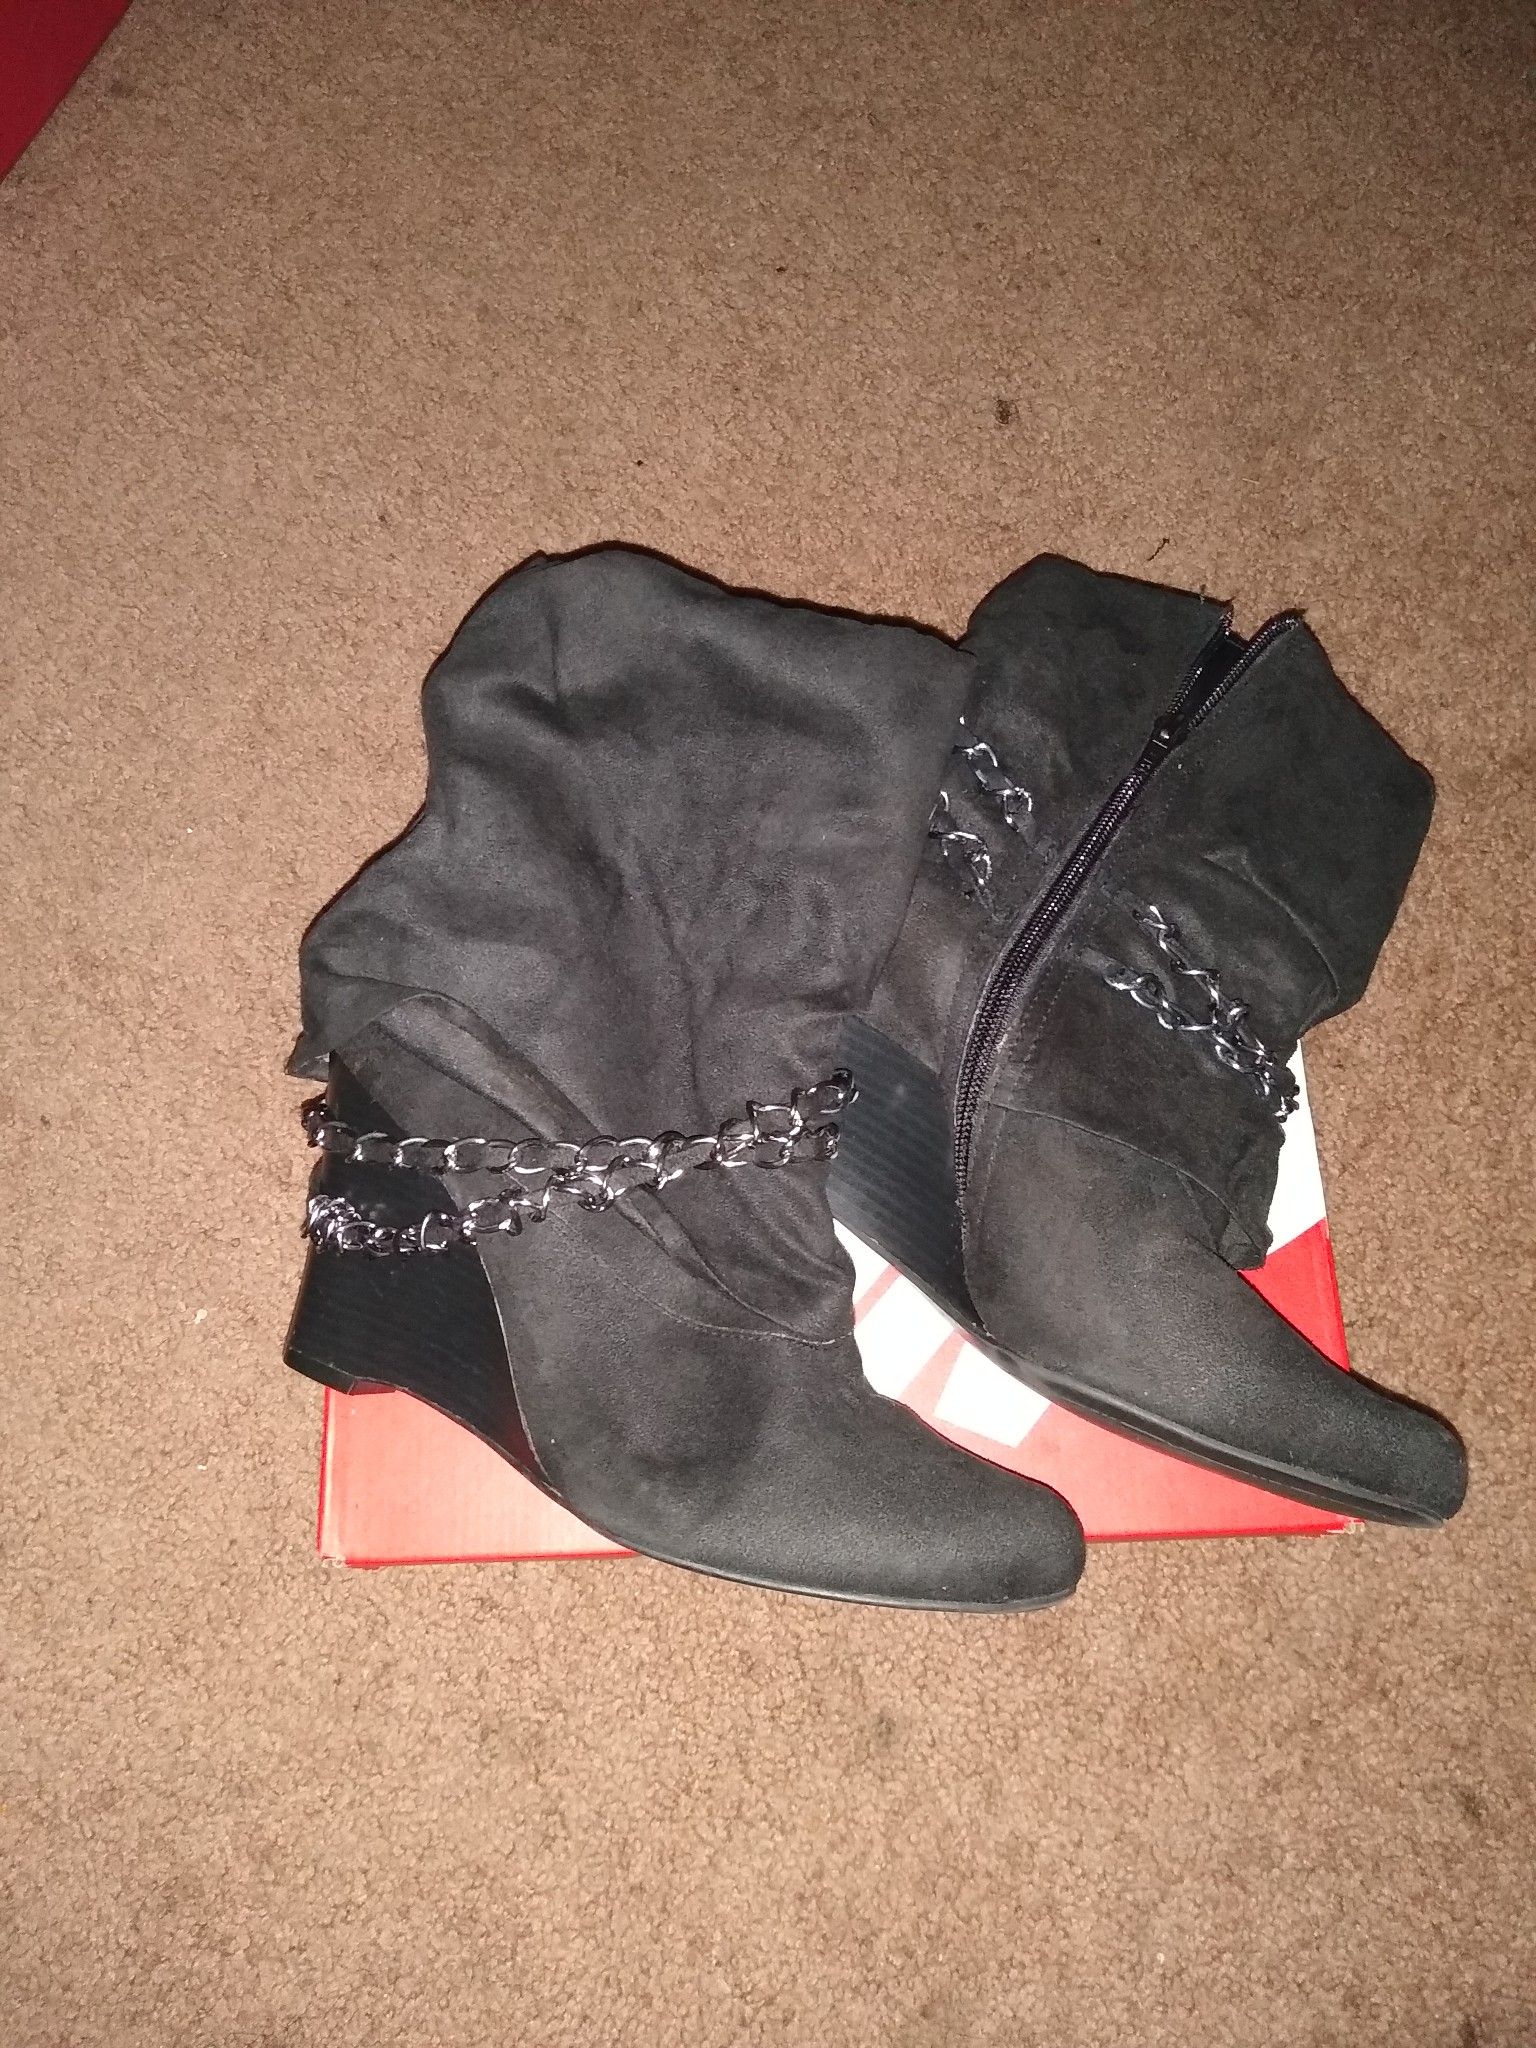 Women's boots size 10